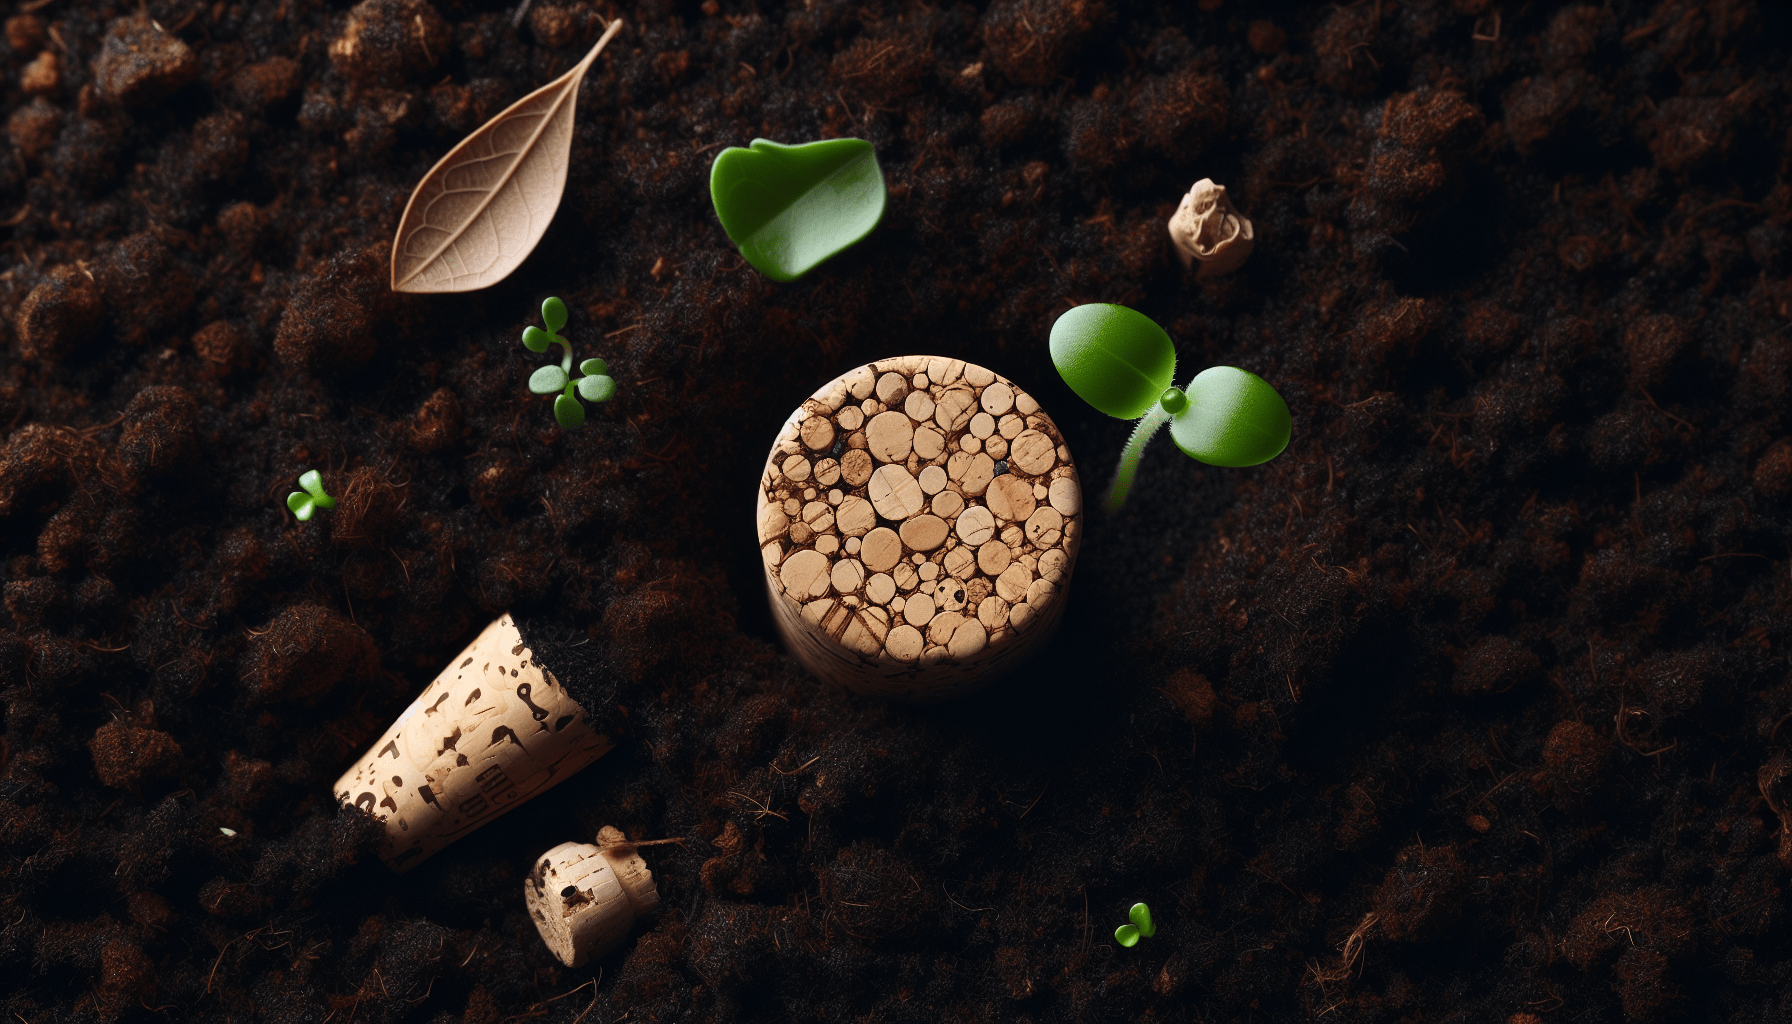 Can I Compost Wine Corks?